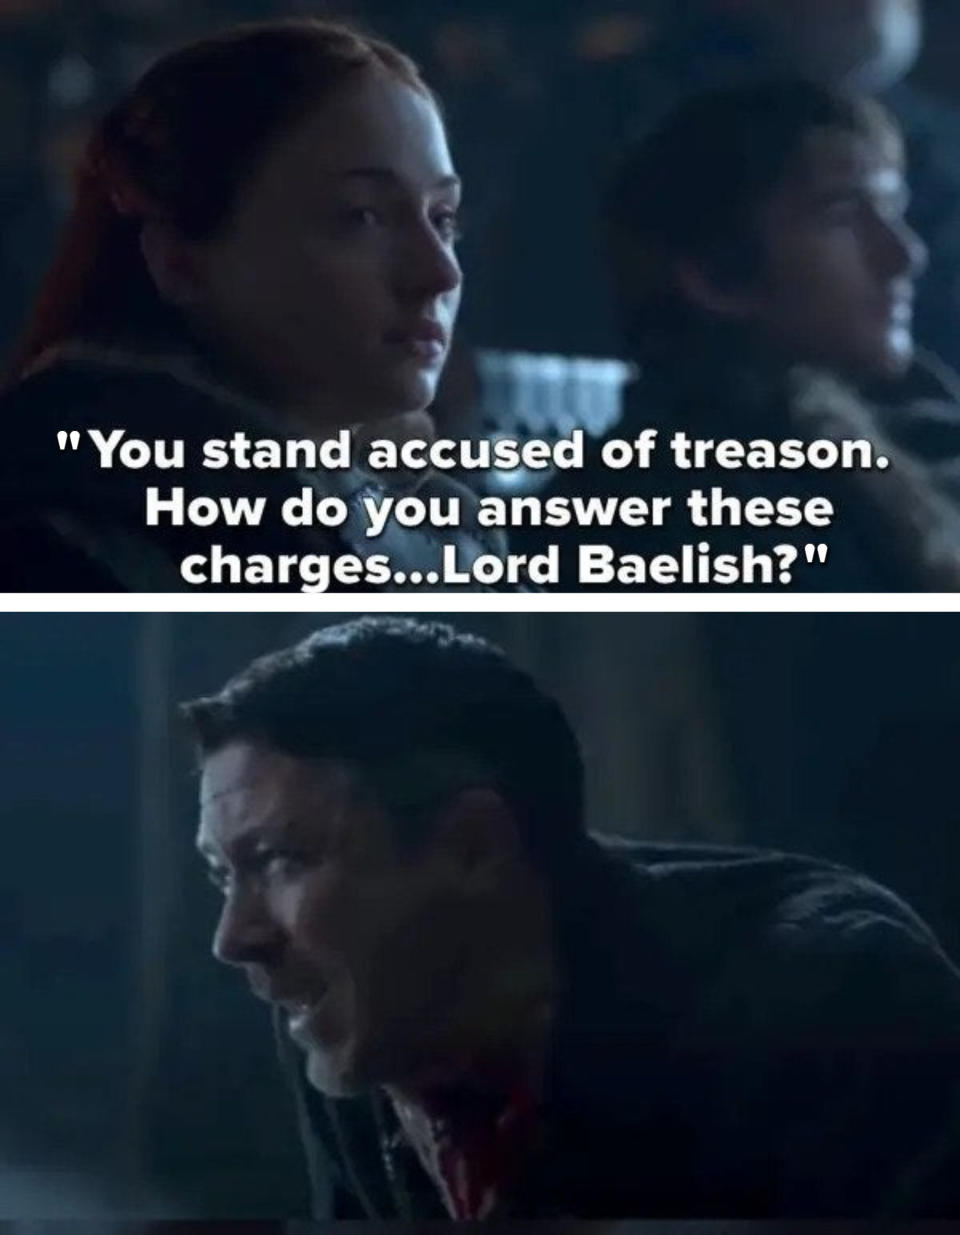 Sansa says "You stand accused of treason; how do you answer these charges...Lord Baelish?" then Arya slits his throat